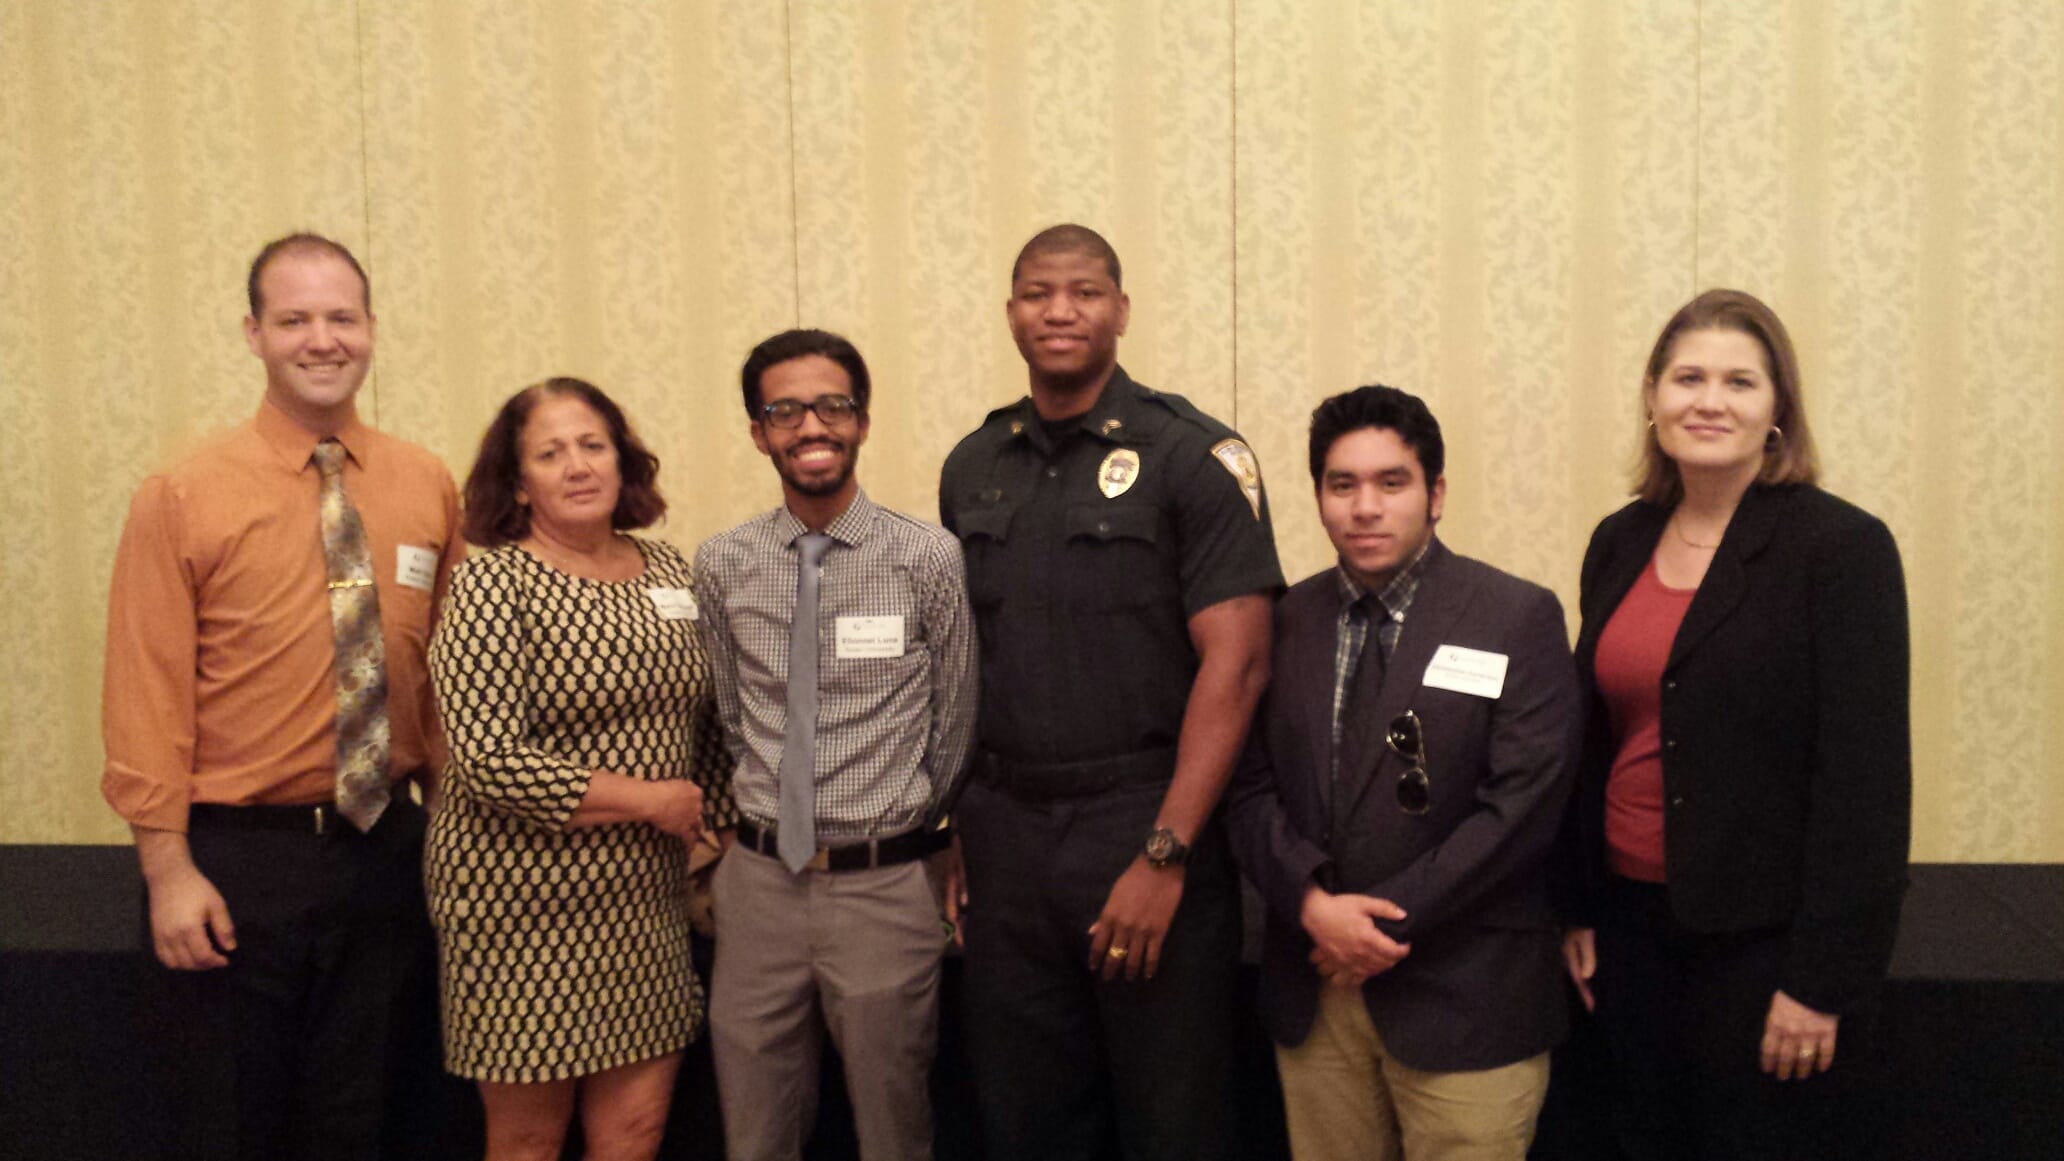 West Palm Beach Students Attend a Palm Beach North Chamber Event